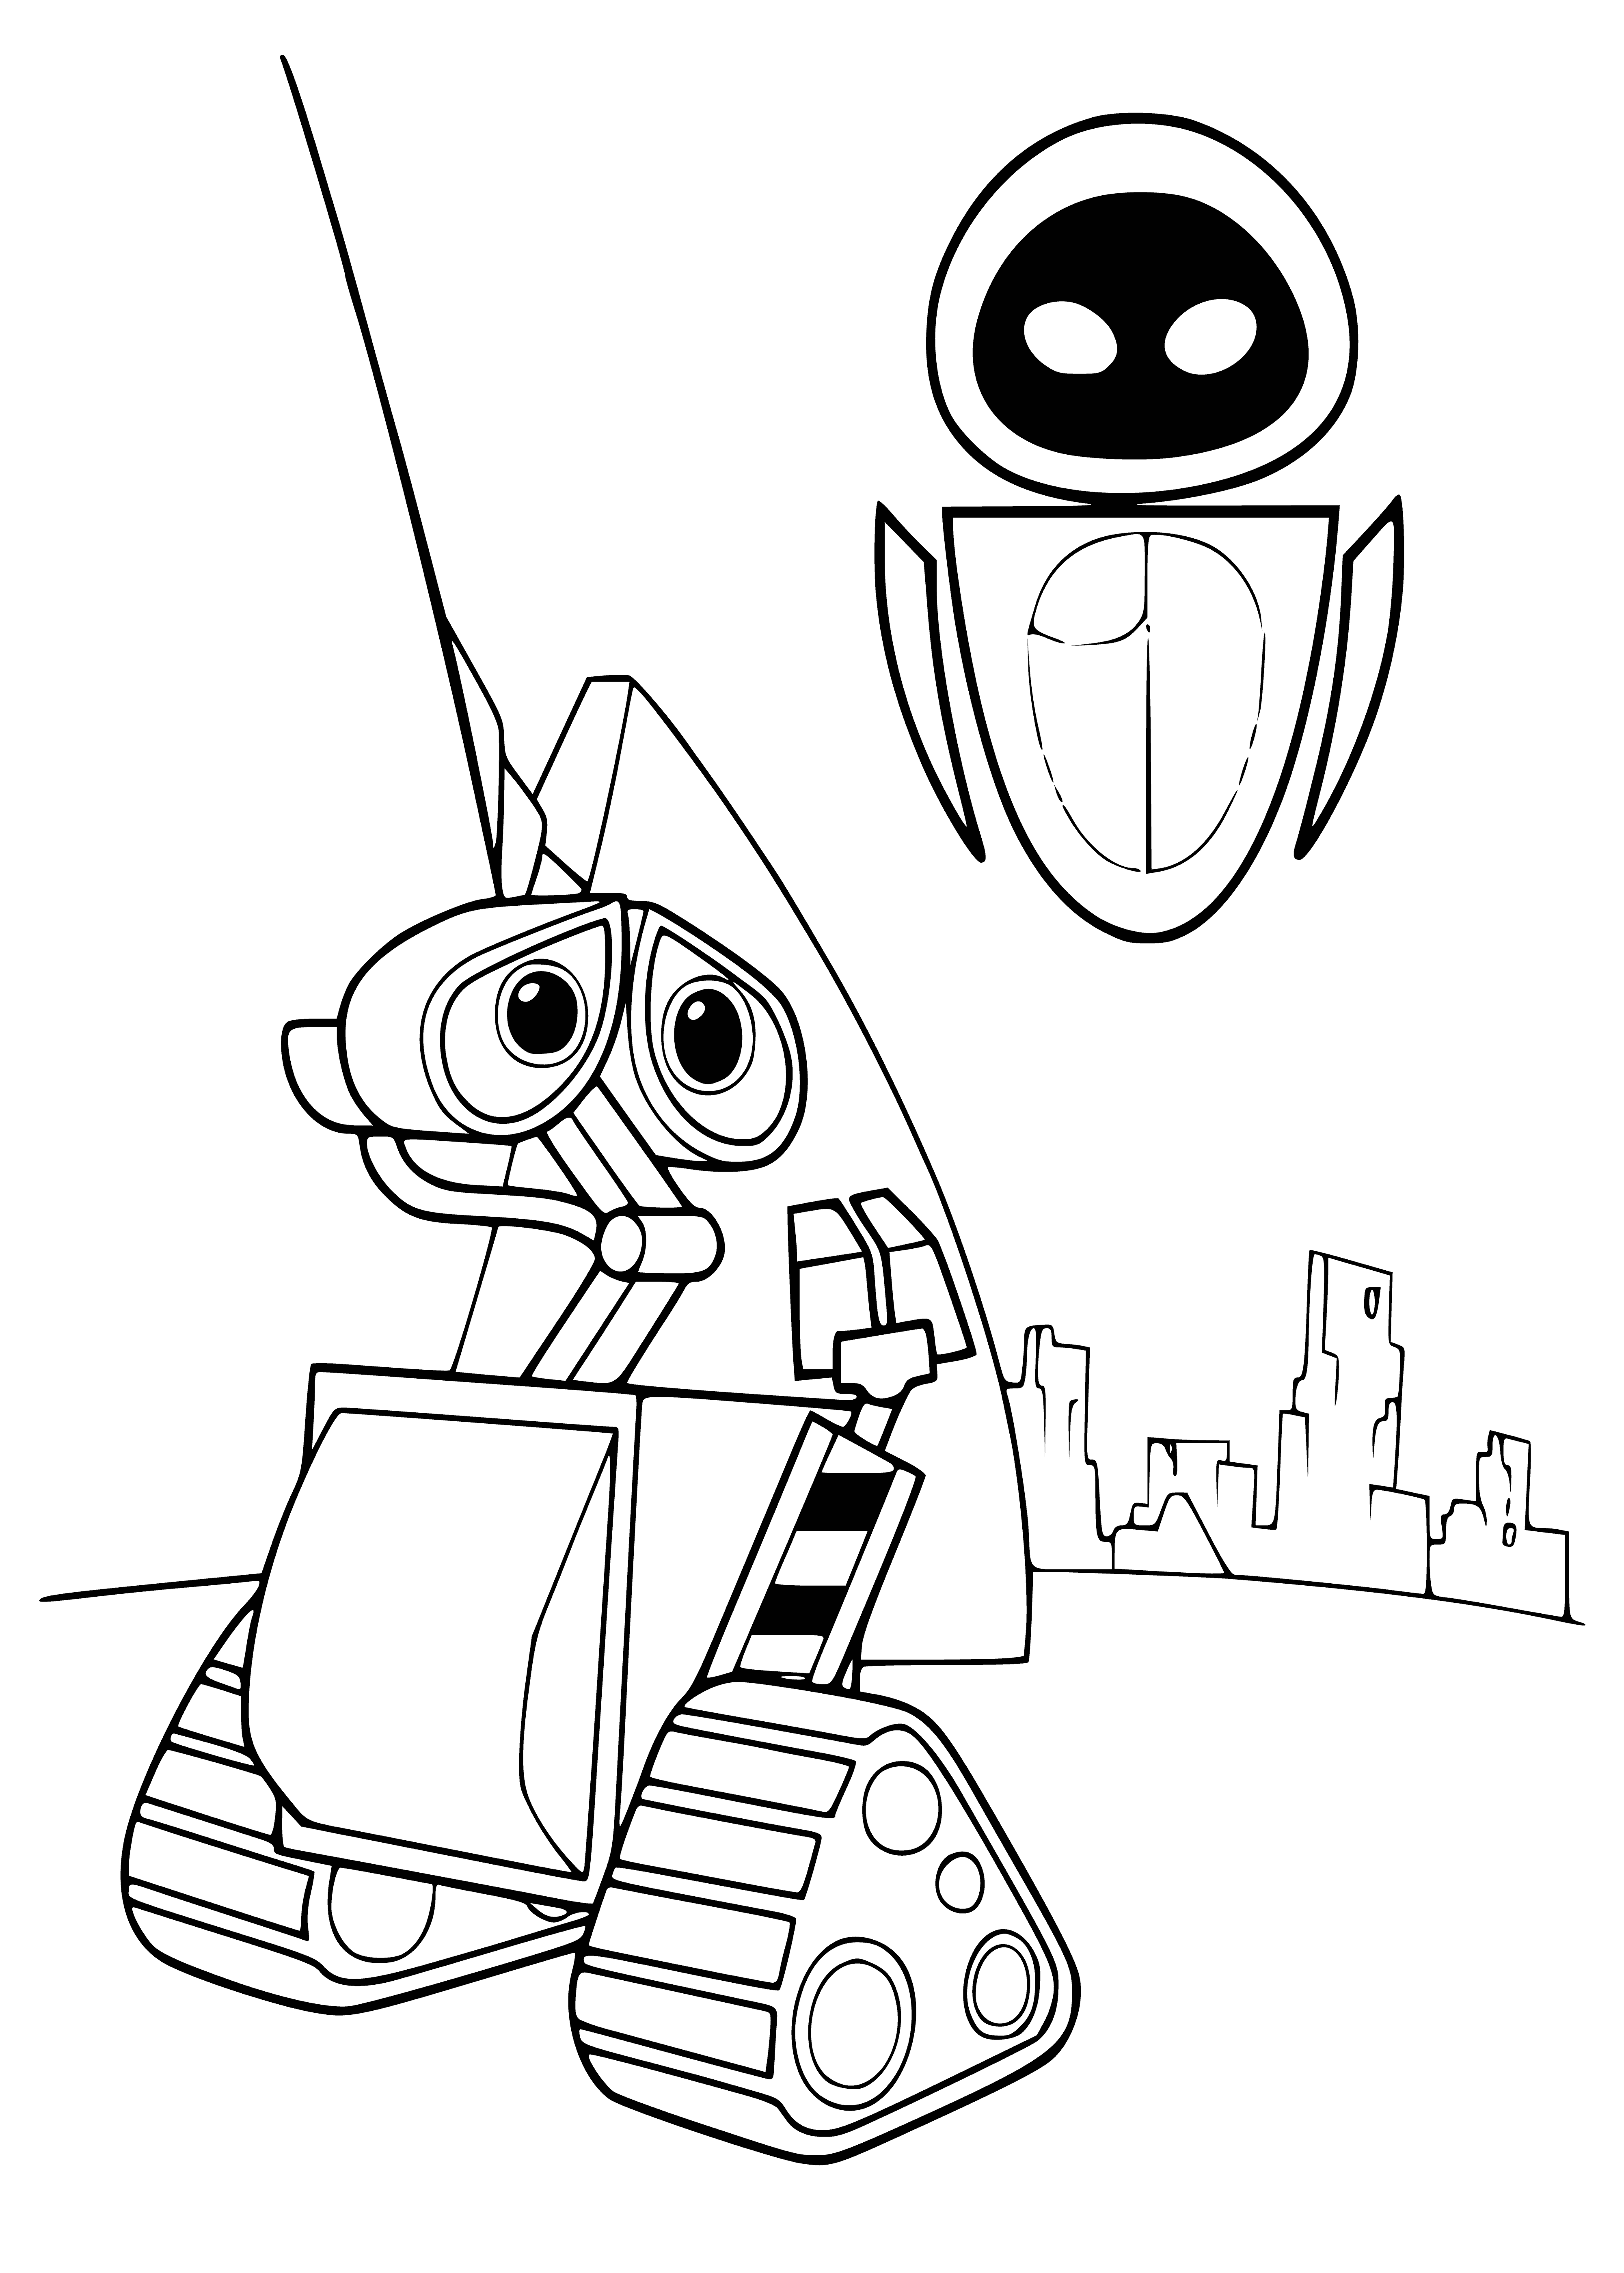 coloring page: Robot stands in front of spaceship w/ blue & white hull in green valley w/ mountains in background.